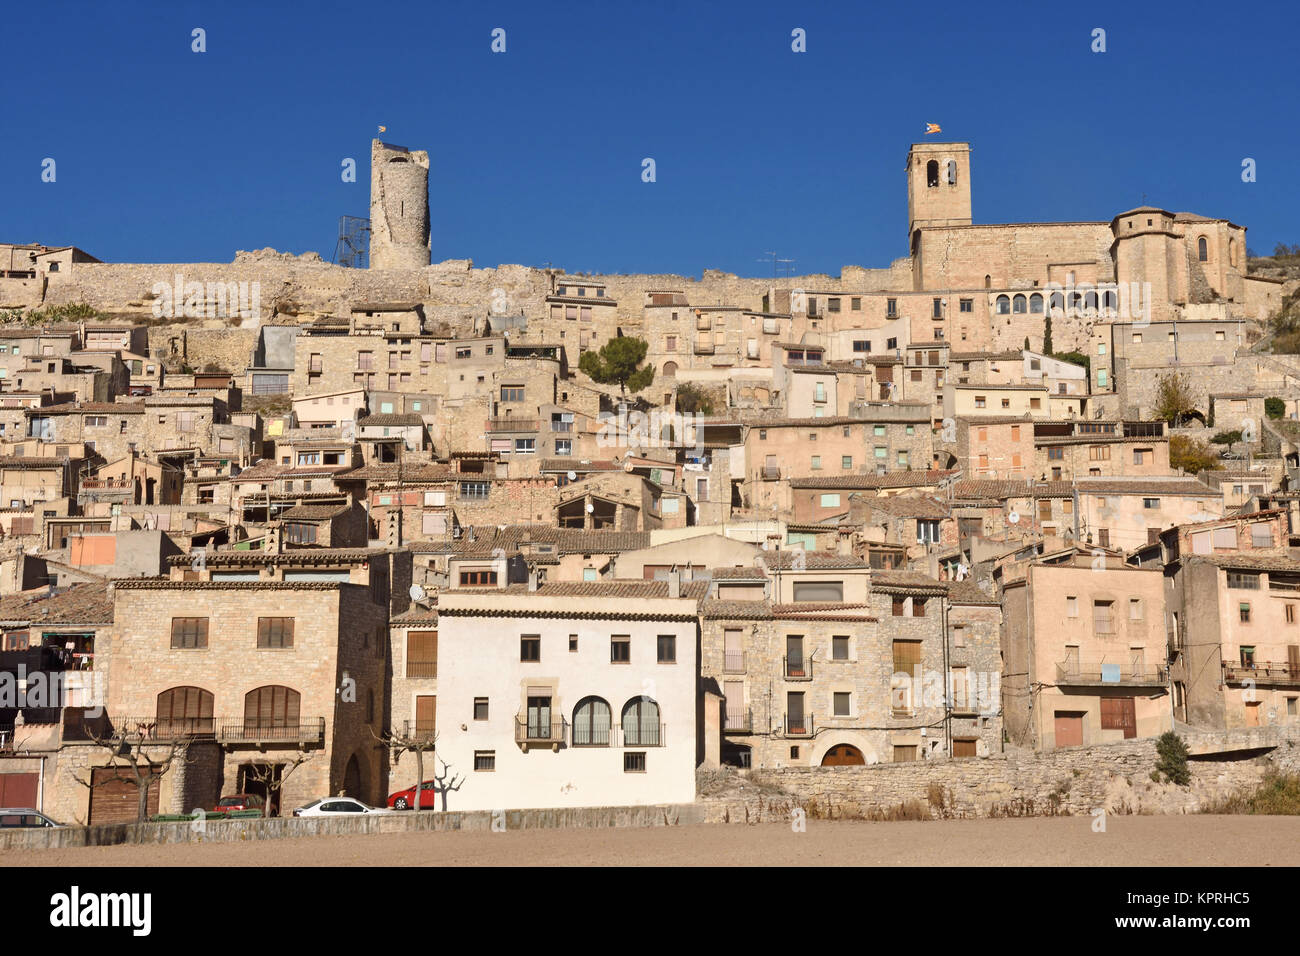 medieval town of Guimera in the Lleida province, Catalonia, Spain Stock Photo